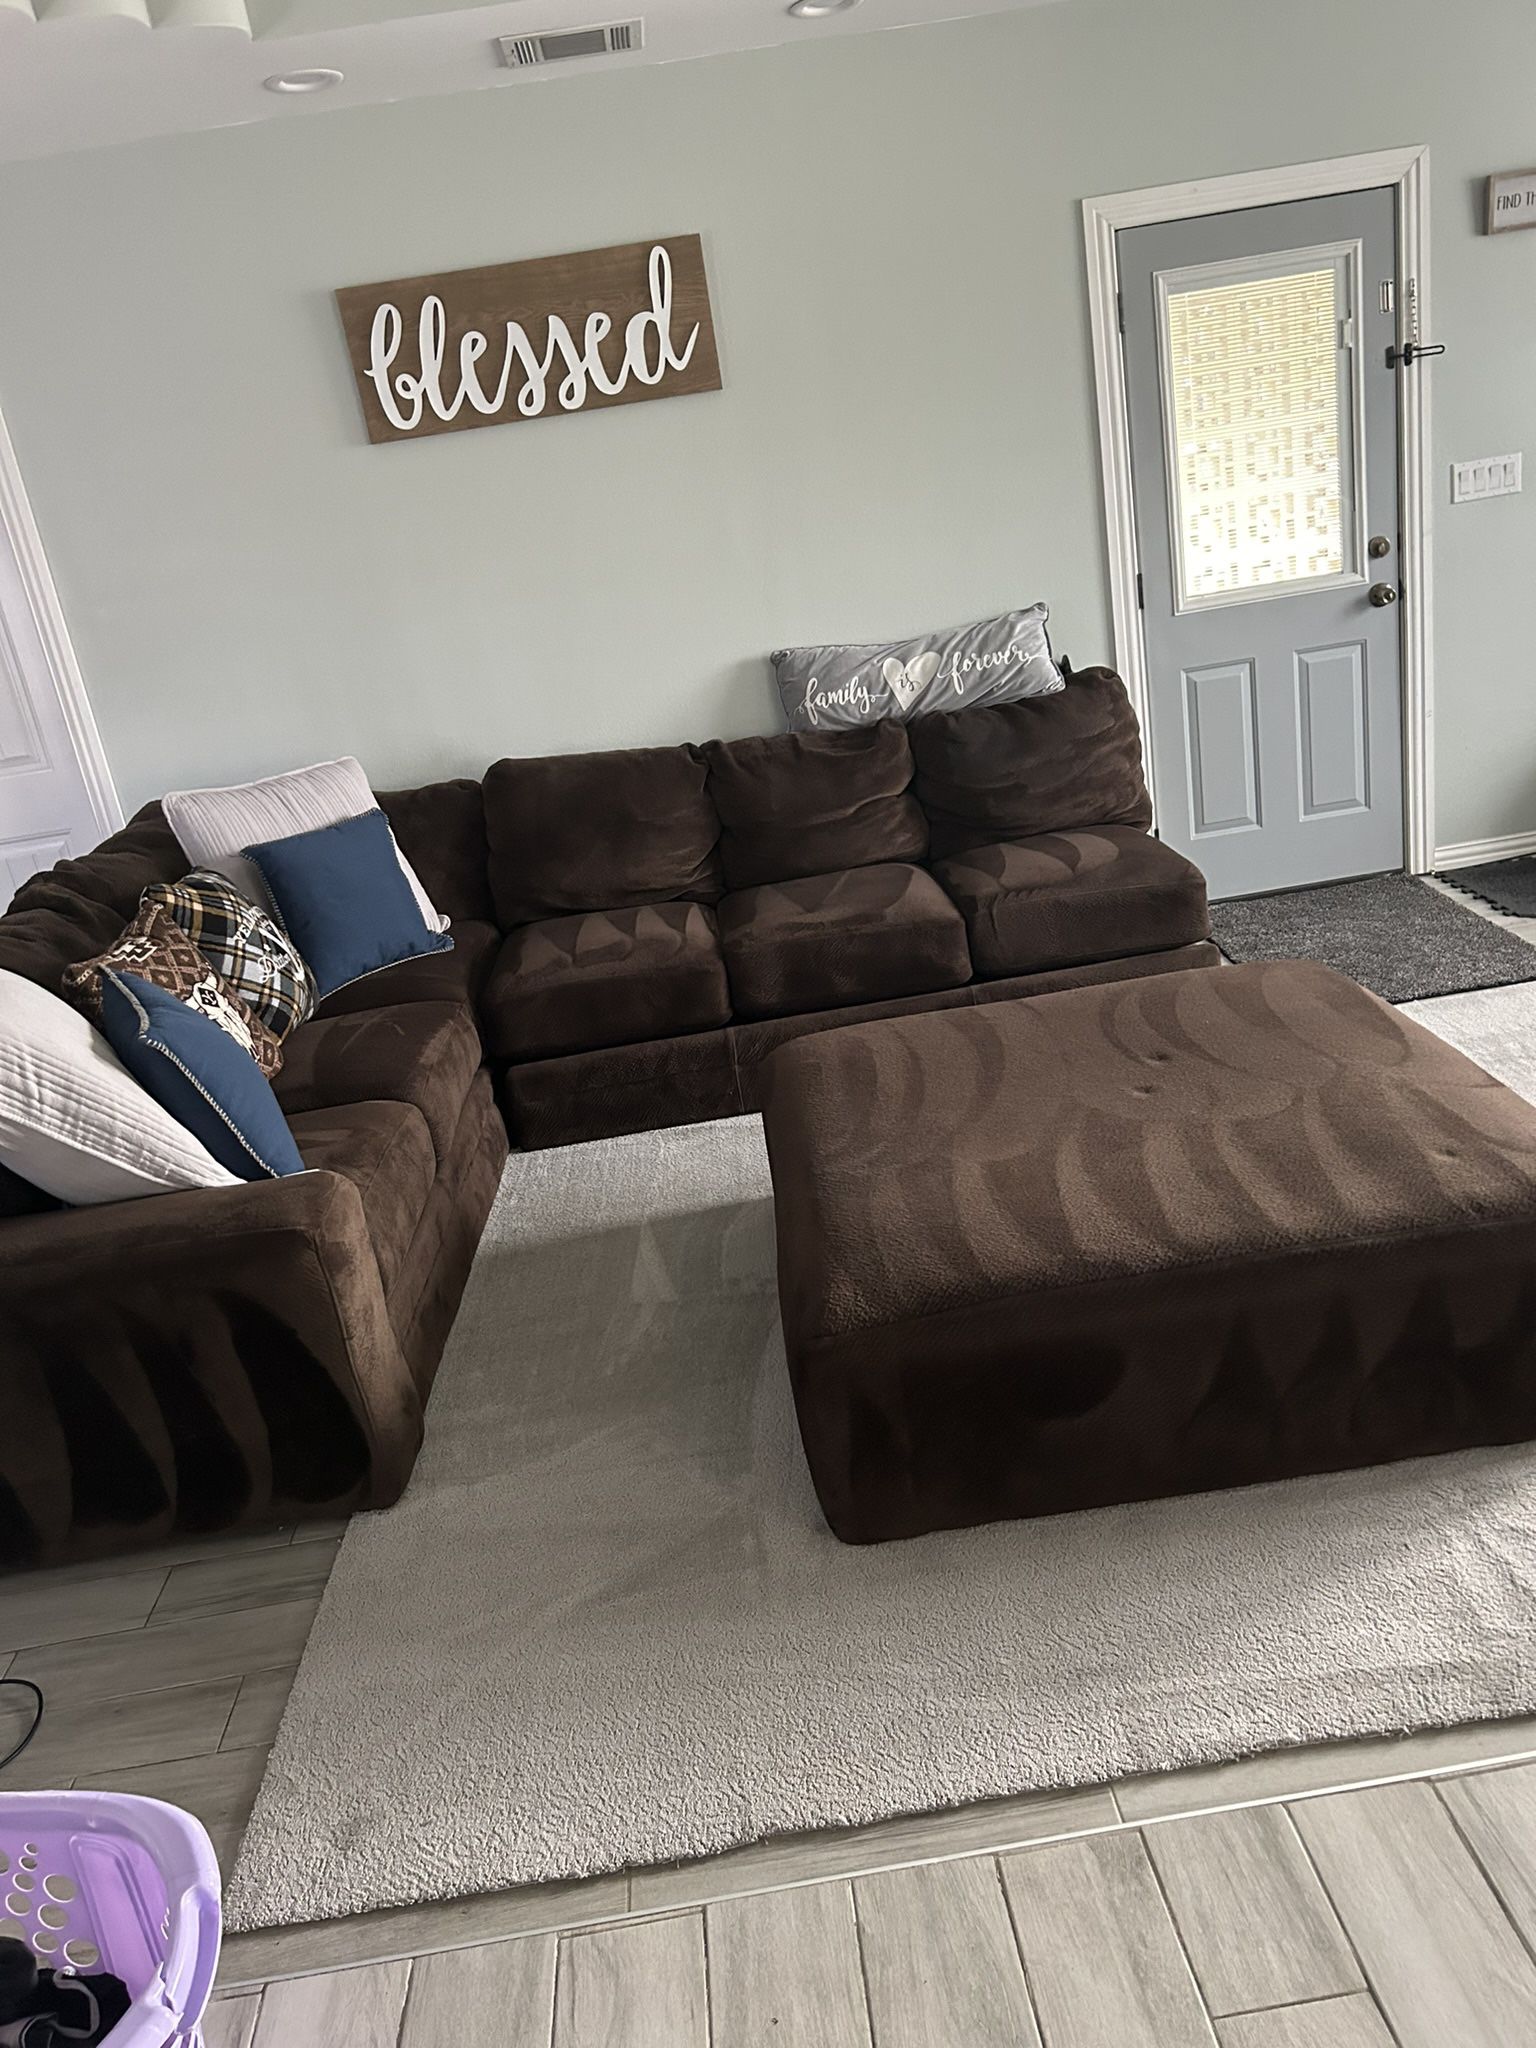 XL sectional couch